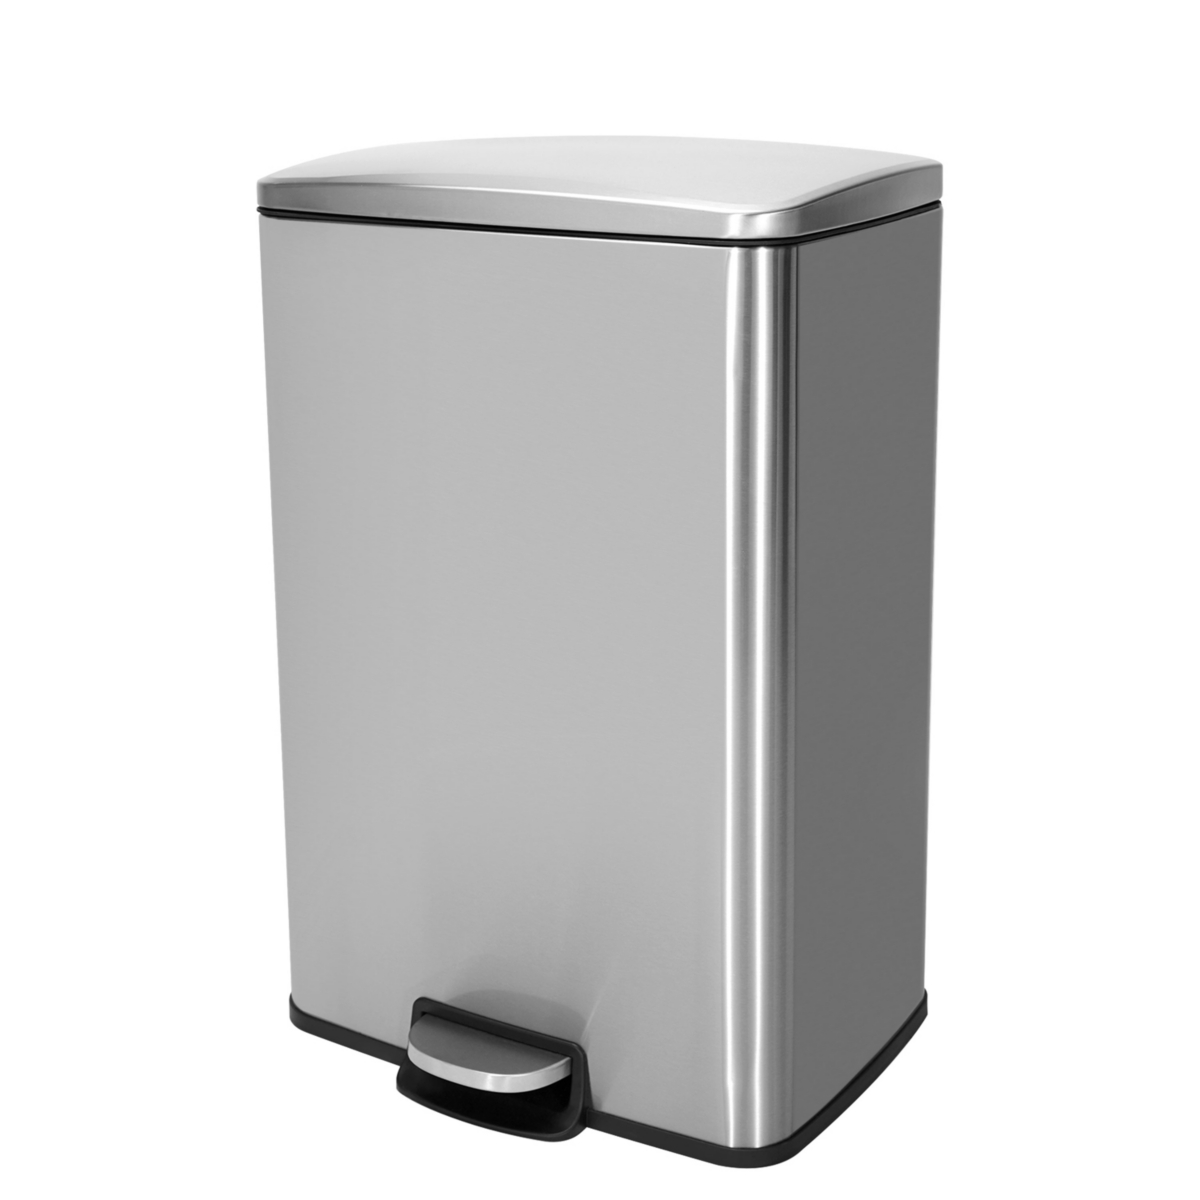 13 Gal./50 Liter Rectangular Stainless Steel Step-on Trash Can for Kitchen - Silver